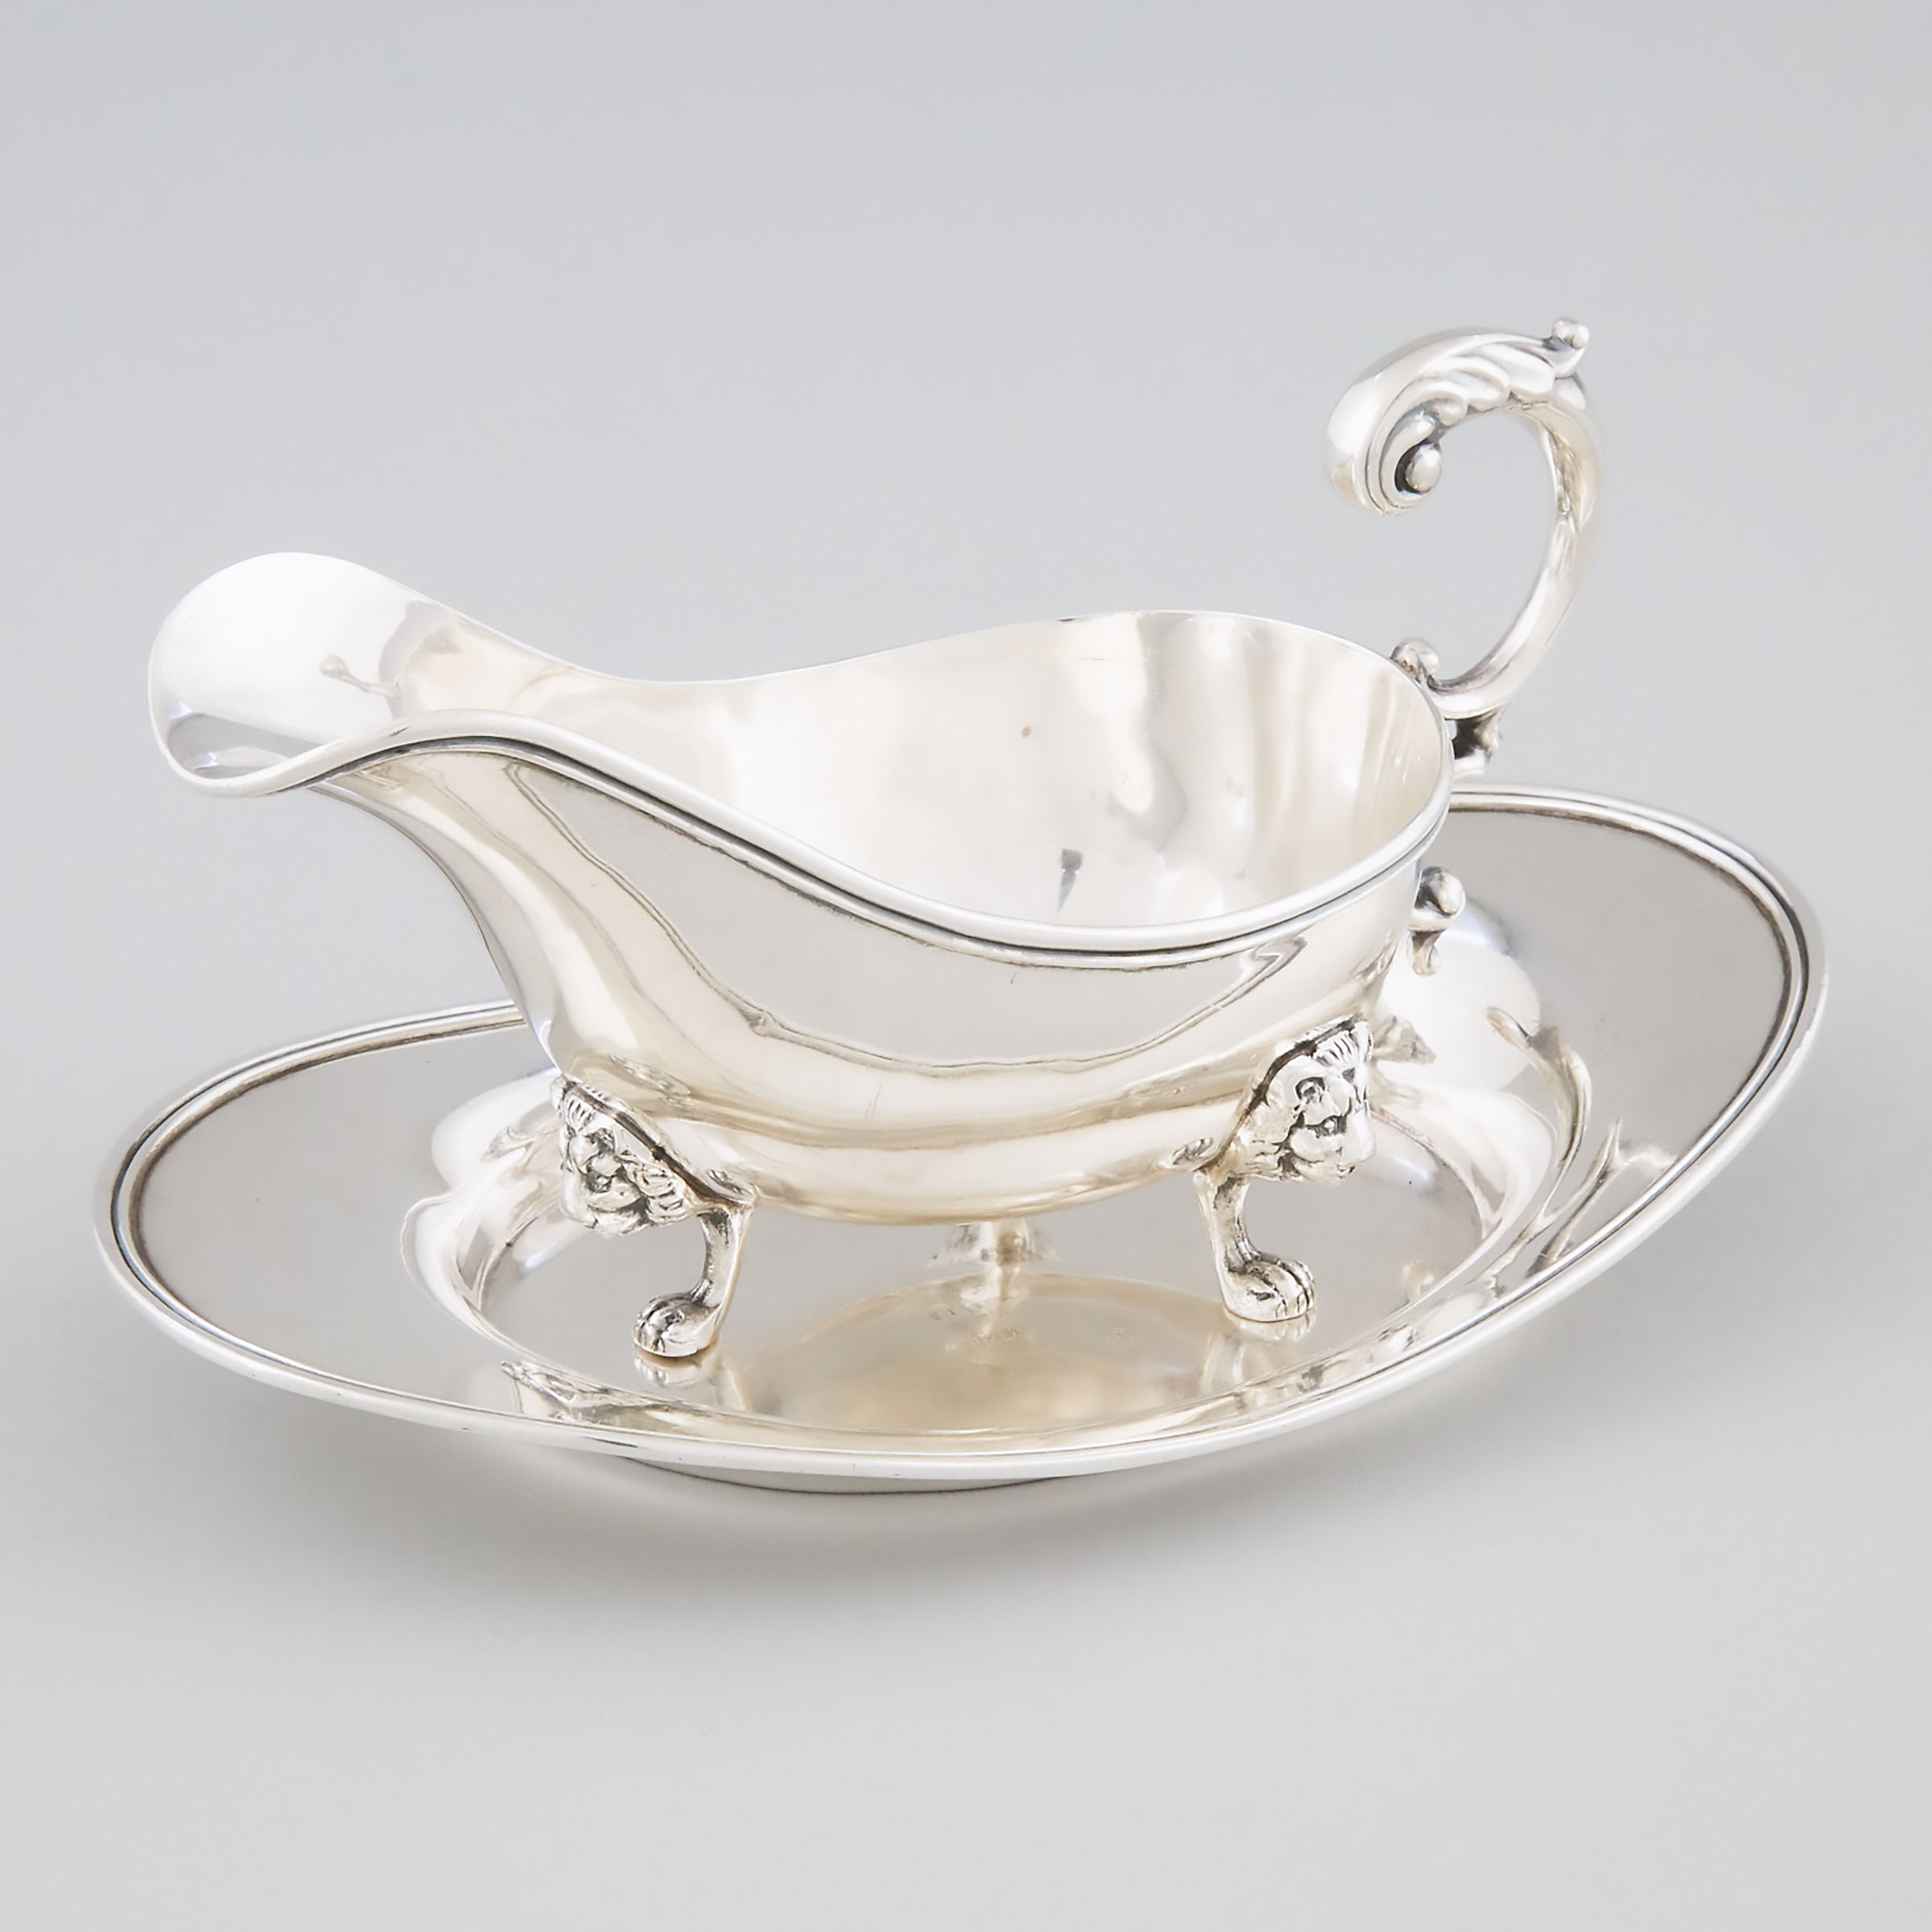 Canadian Silver Sauce Boat and Stand, Henry Birks & Sons, Montreal, Que., 1953/54